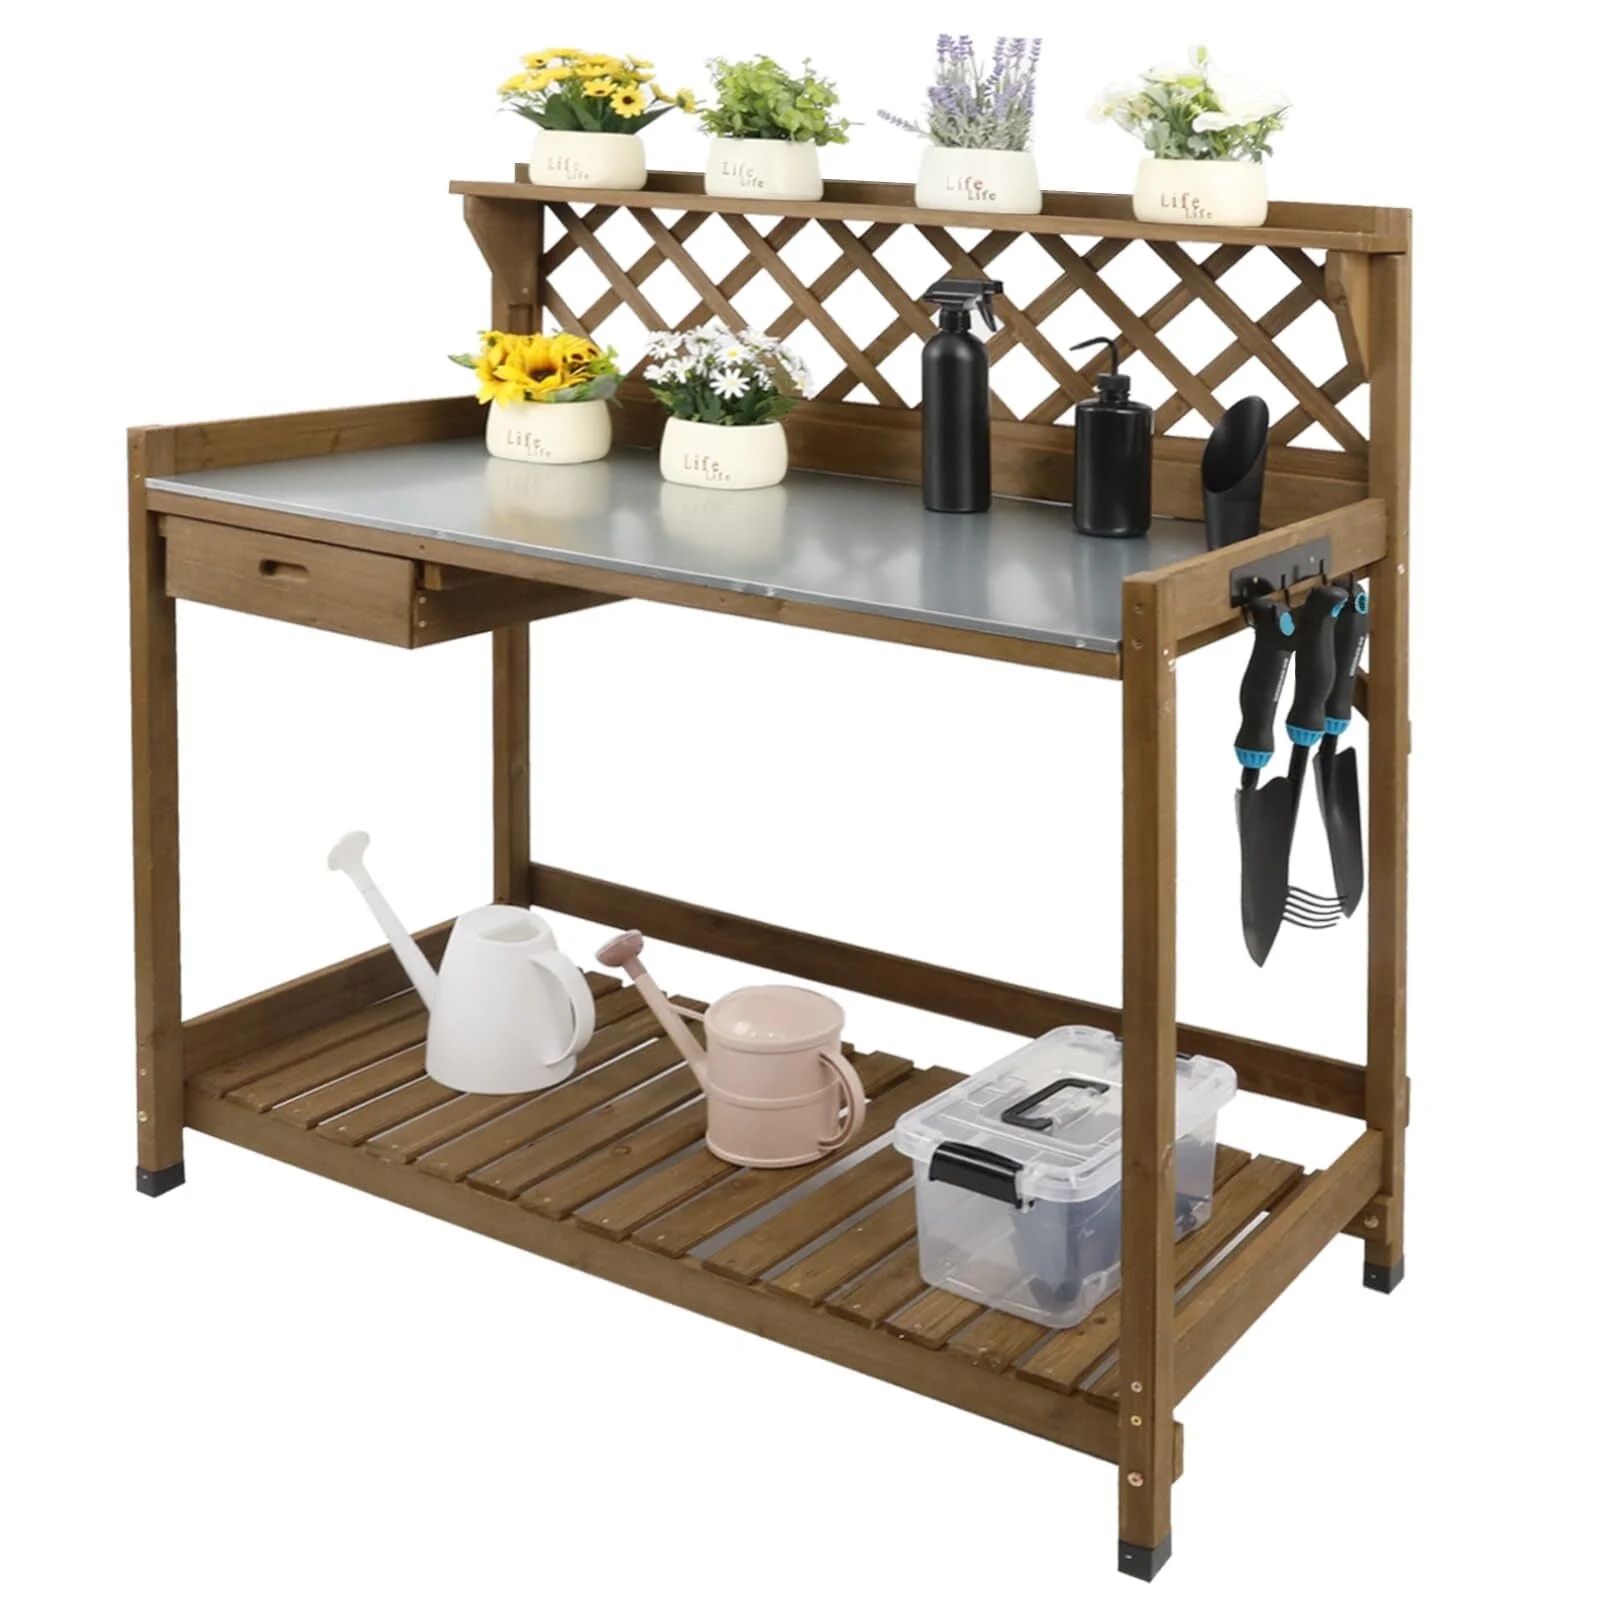 PETSCOSSET Outdoor Wooden Potting Bench, Garden Workstation Table with Cabinet Drawer, Galvanized... | Walmart (US)